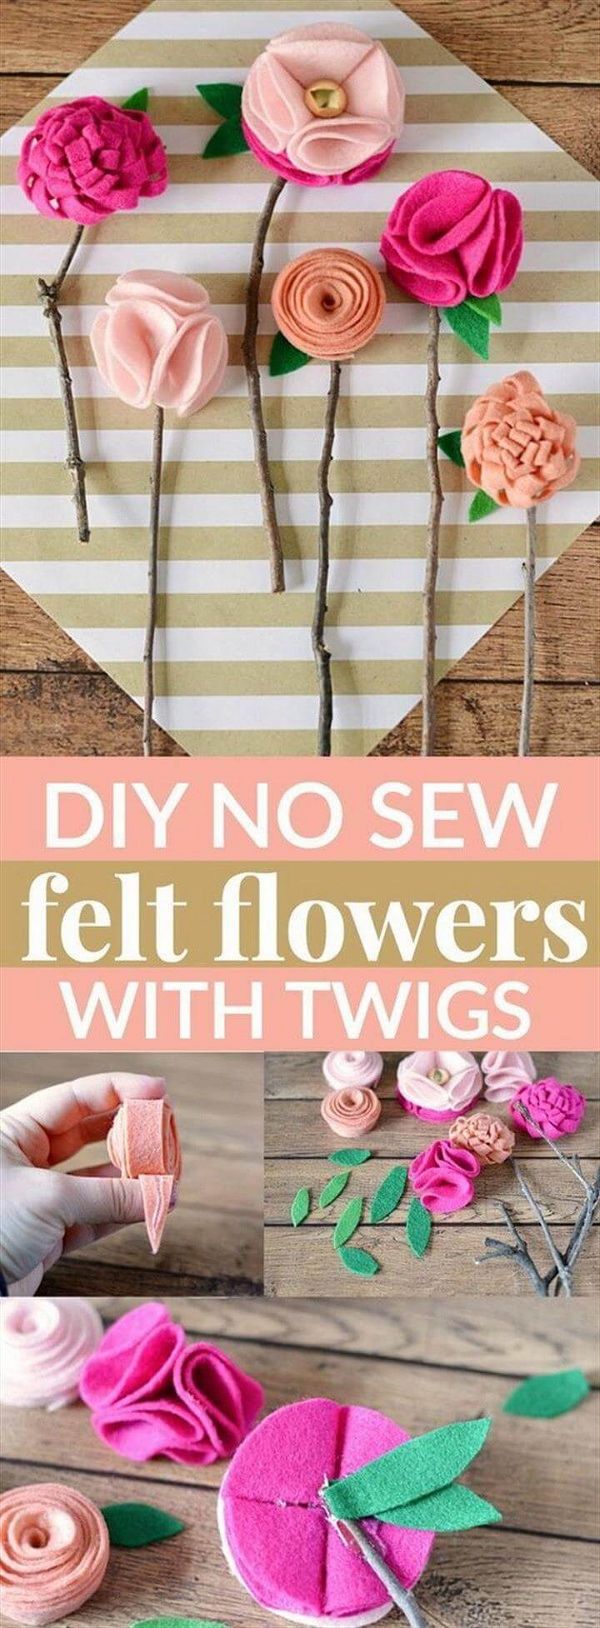 Mother's Day Crafts and gifts: DIY No Sew Felt Flowers With Twigs.